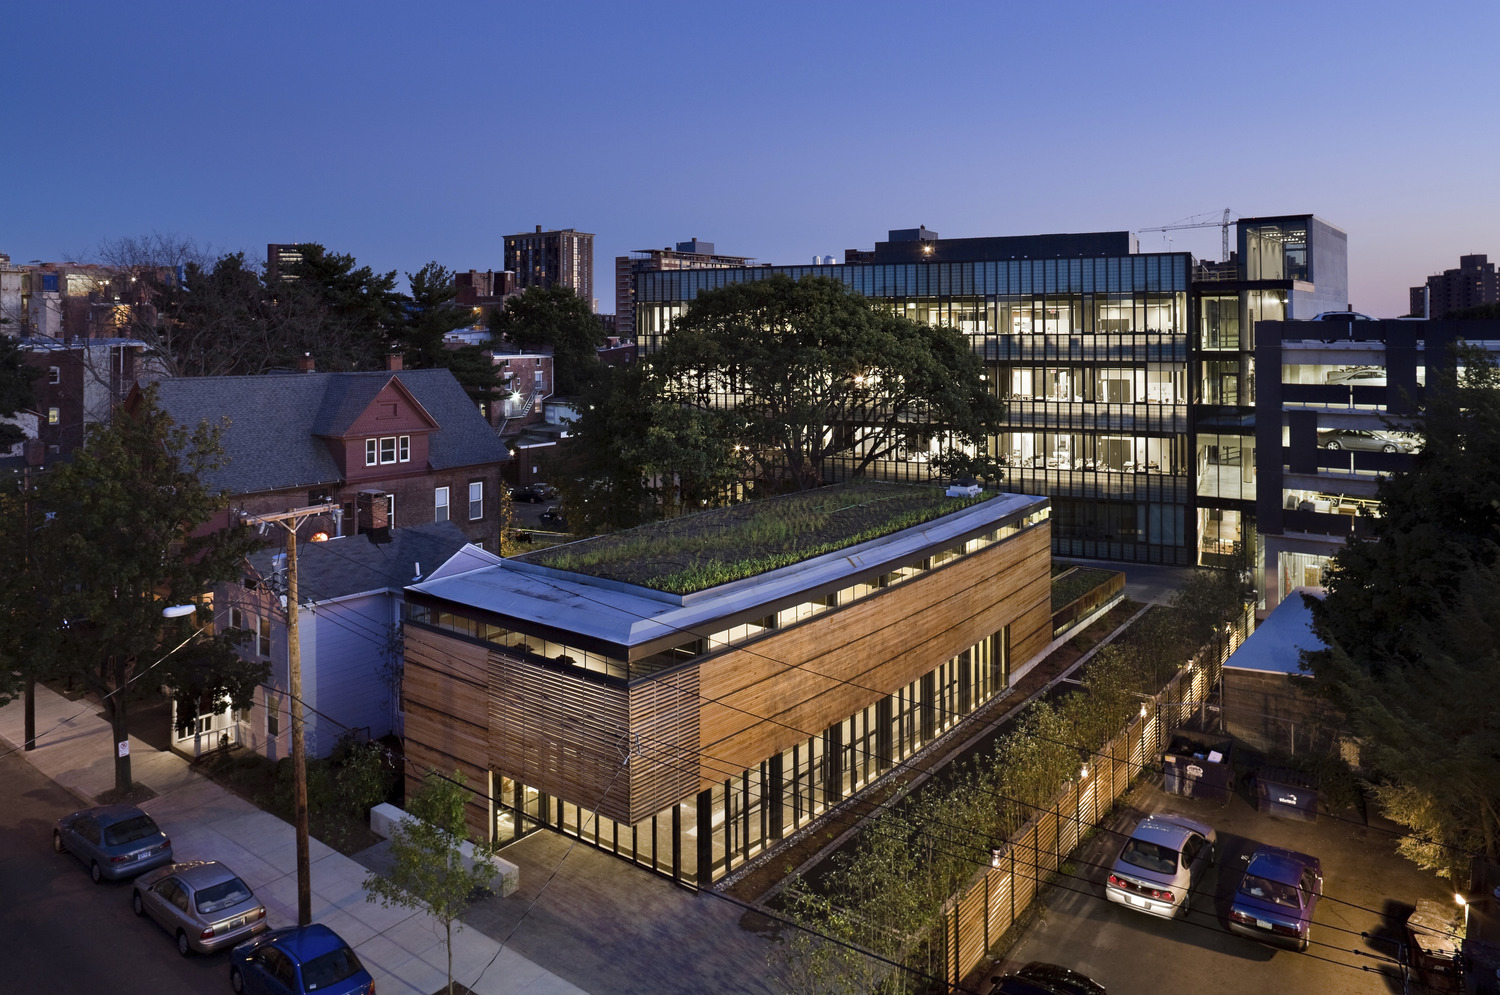 <p>New plantings and shade trees create a park-like setting on a former brownfield site. The wood-clad gallery at Yale University is a new nexus of community activity for the arts. | <small>&copy; Peter Aaron/OTTO</small></p>